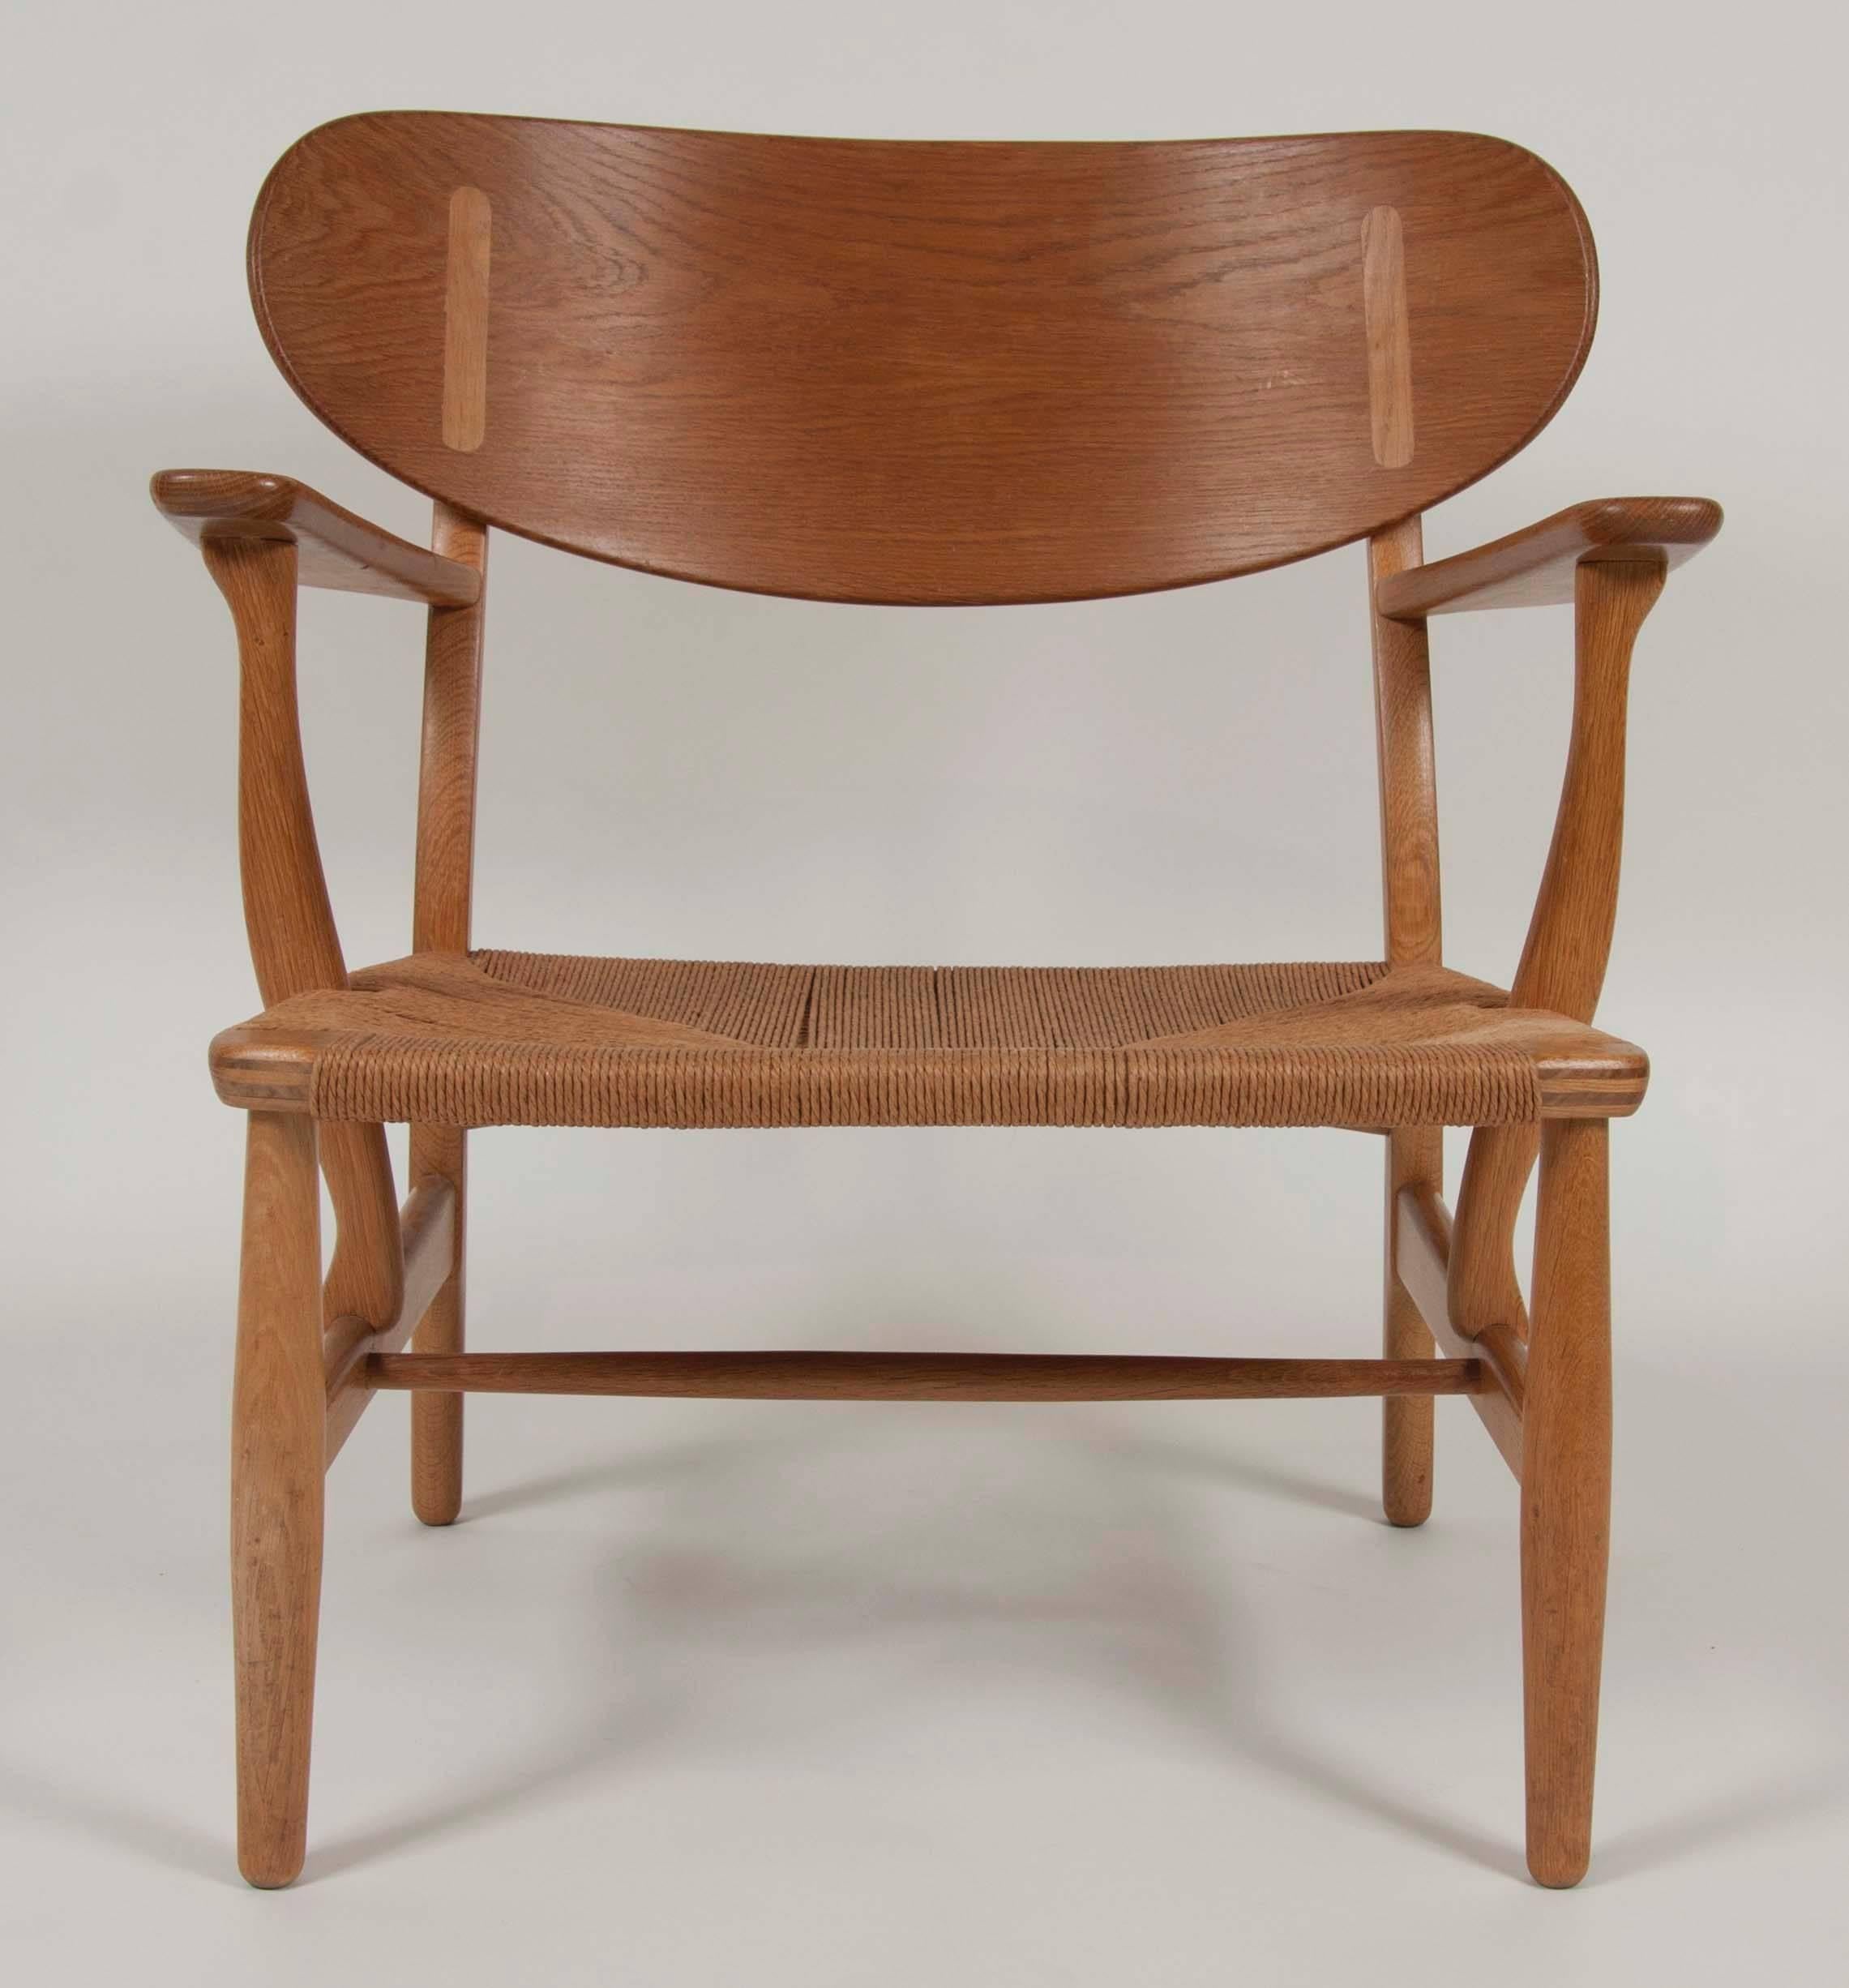 Oak armchair with wide paddle form arms and sculpted and inlaid back. Also having a Danish paper cord seat. The chair was designed by Hans J. Wegner and manufactured by Carl Hansen & Søn, 1951.